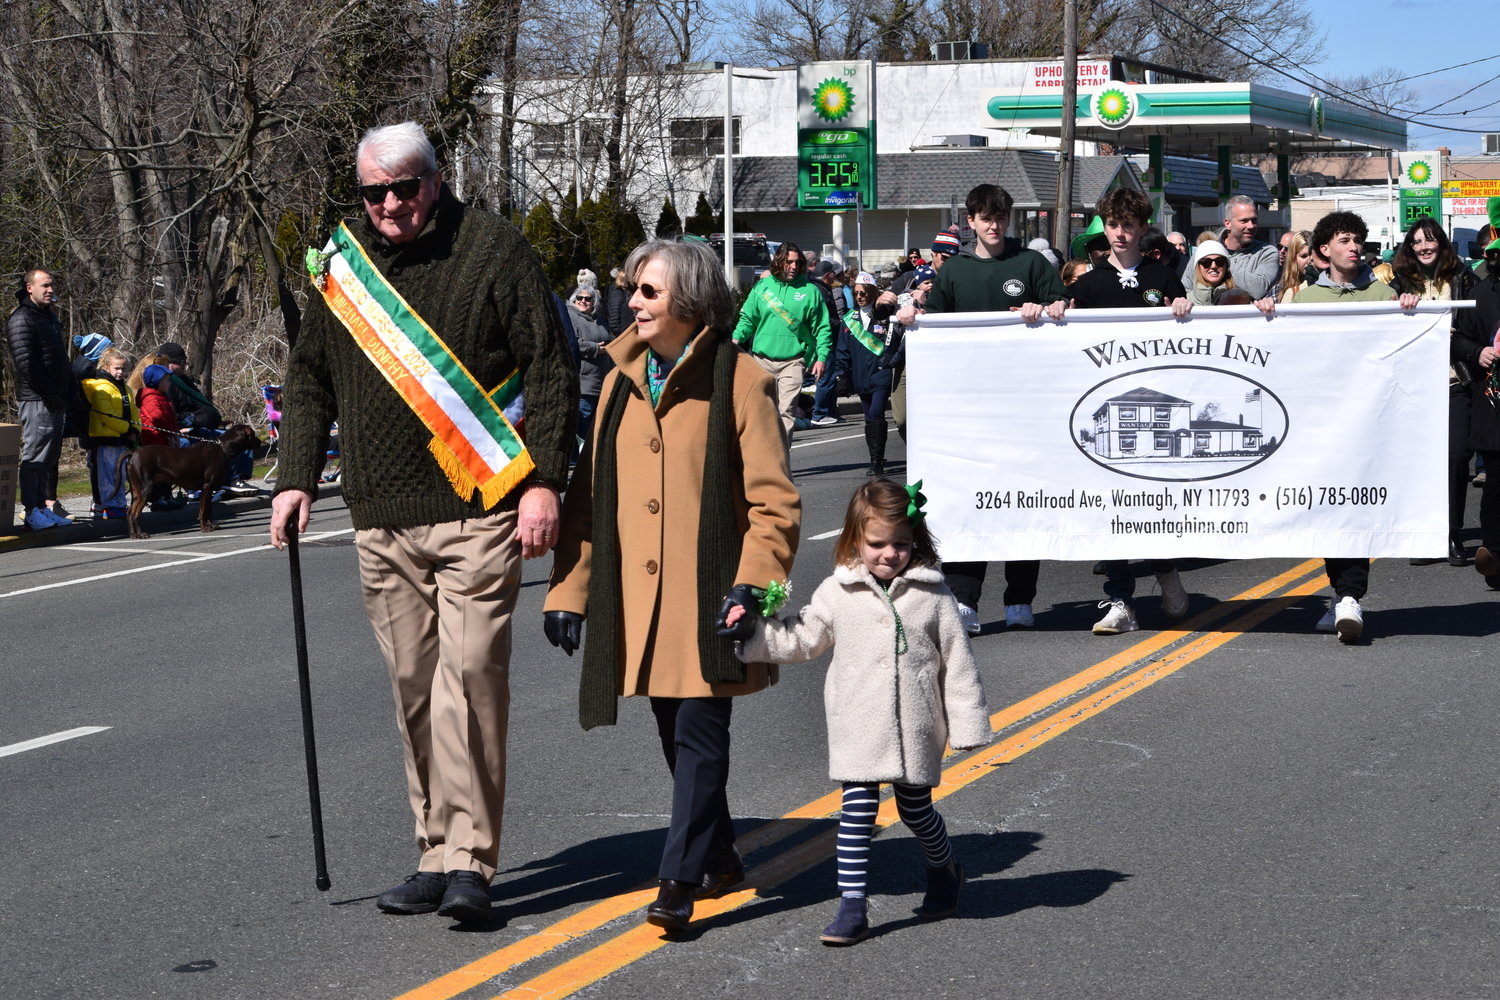 Grand Marshal Mike Dunphy, with his wife of 50 years, Geraldine, and their granddaughter, was met with applause from Beltagh Avenue to Wantagh Avenue and all the way to Railroad Avenue as he led the procession.